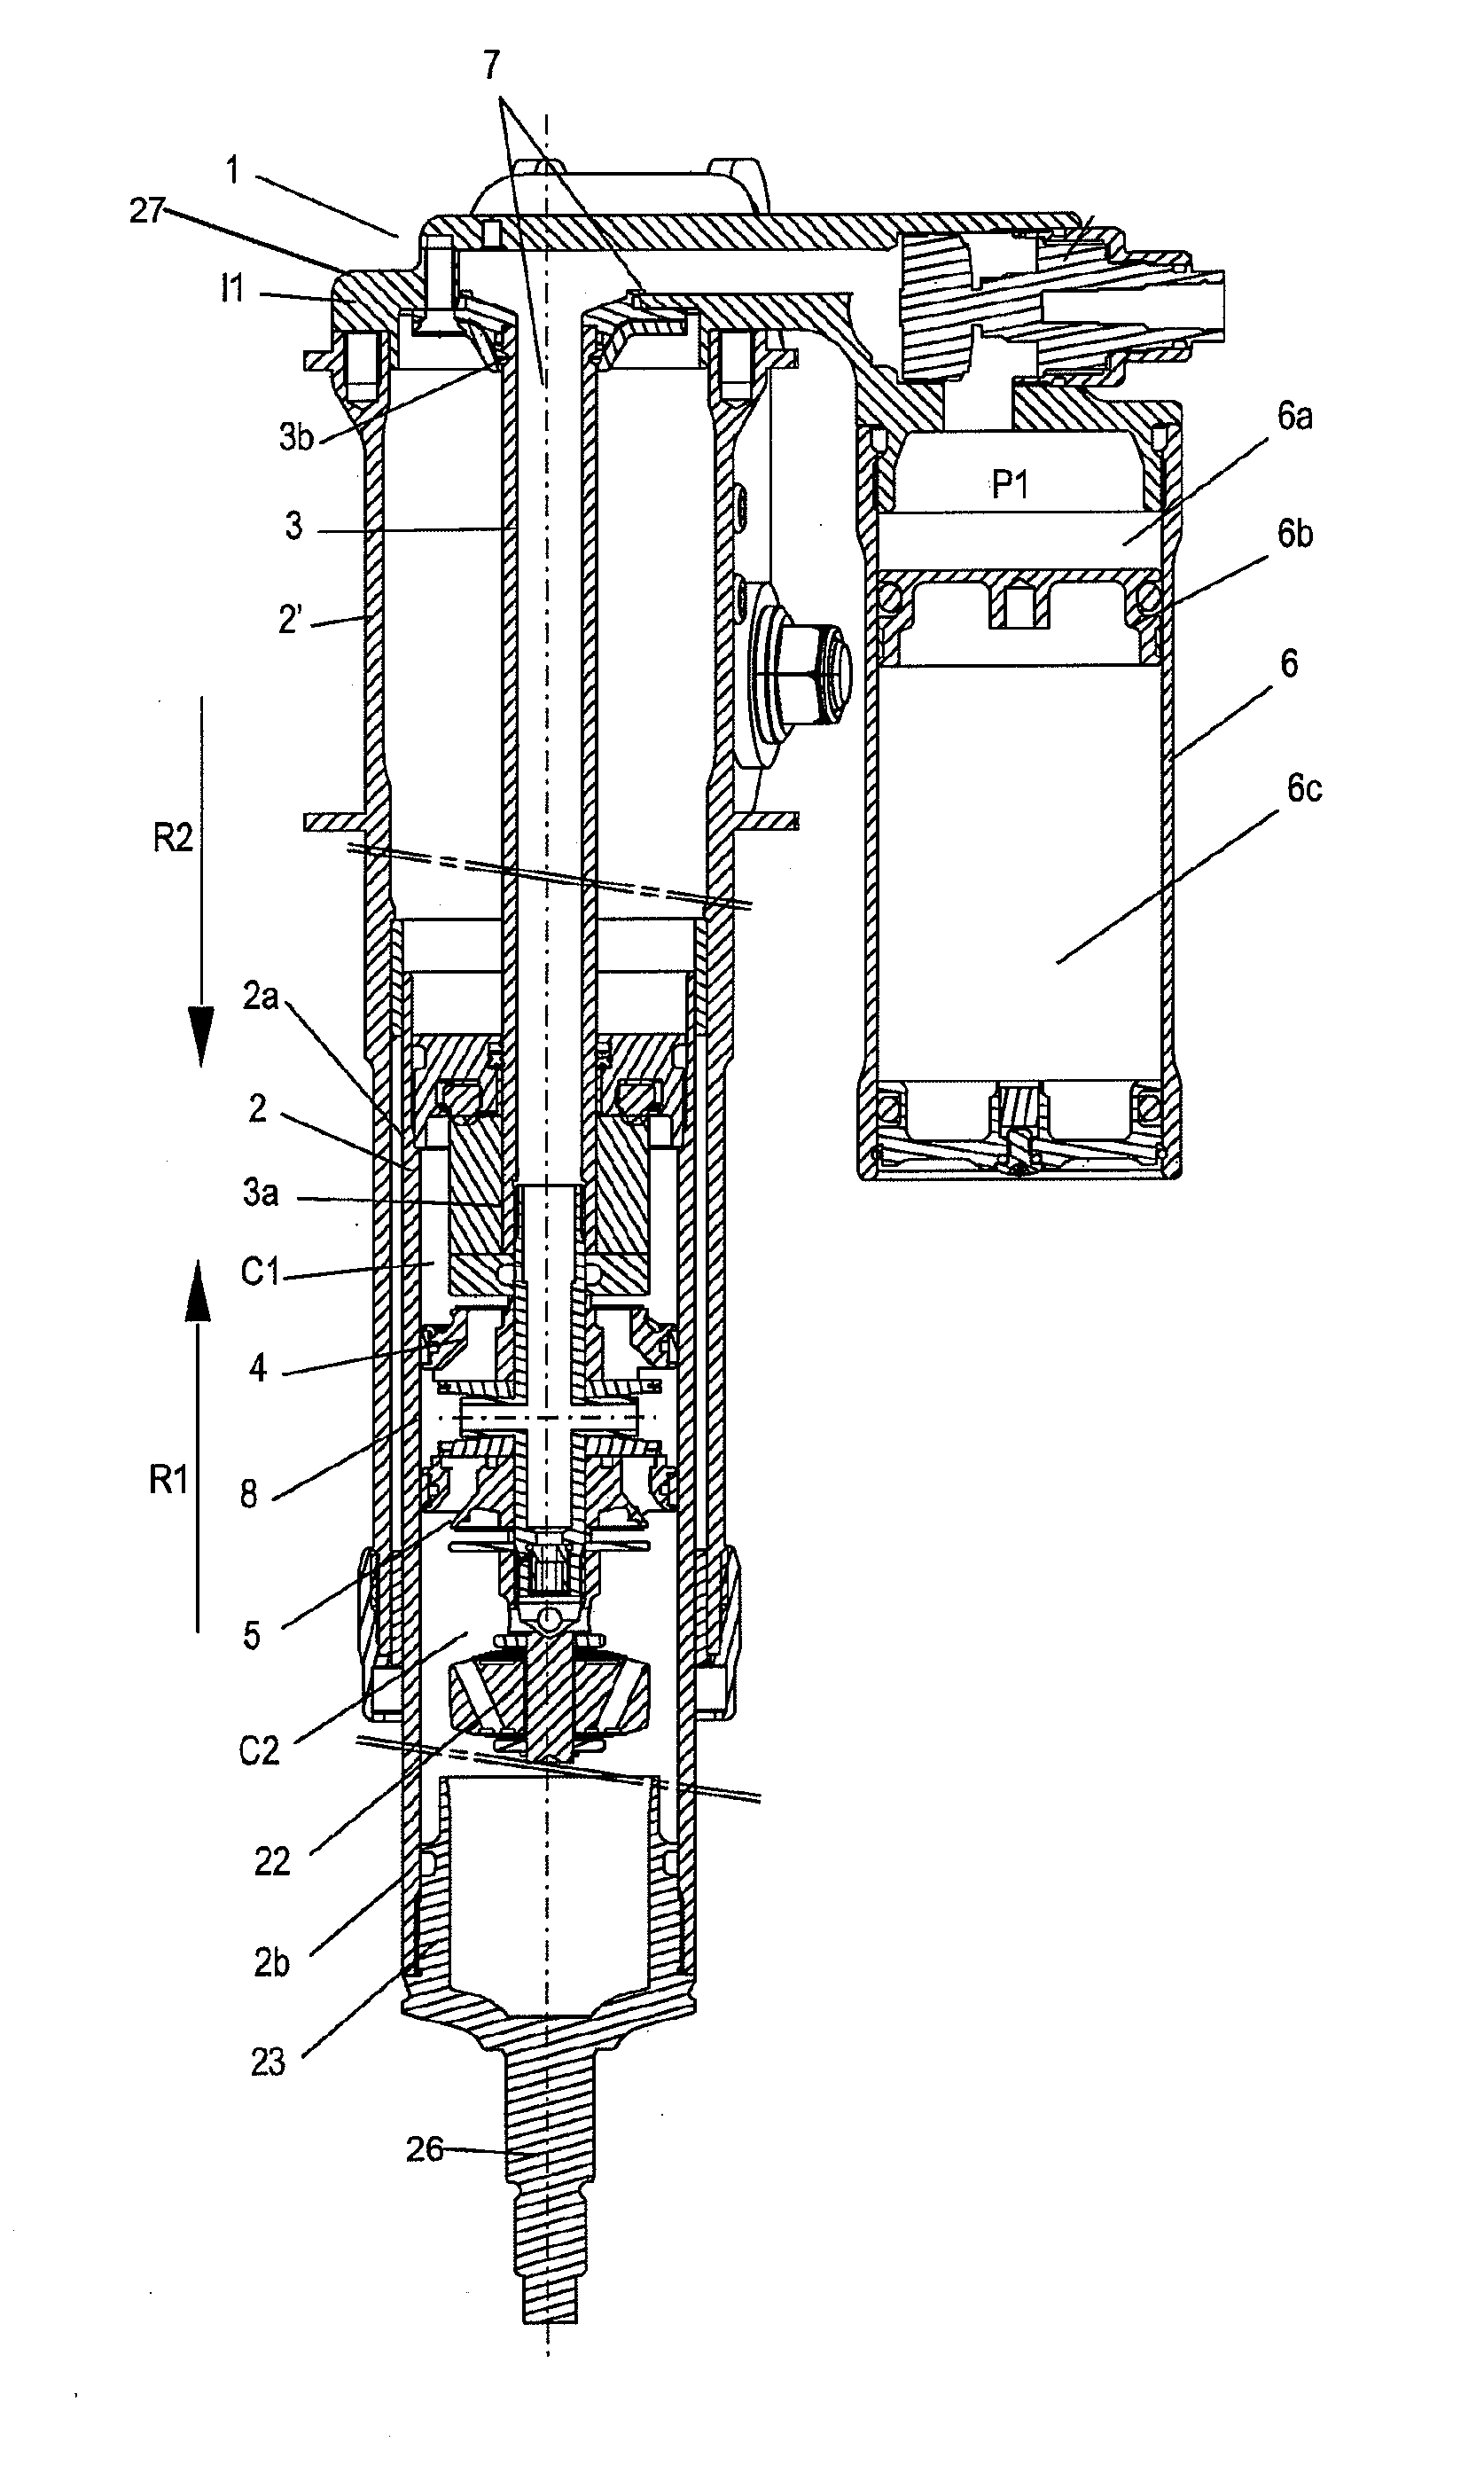 Shock absorber with dual piston